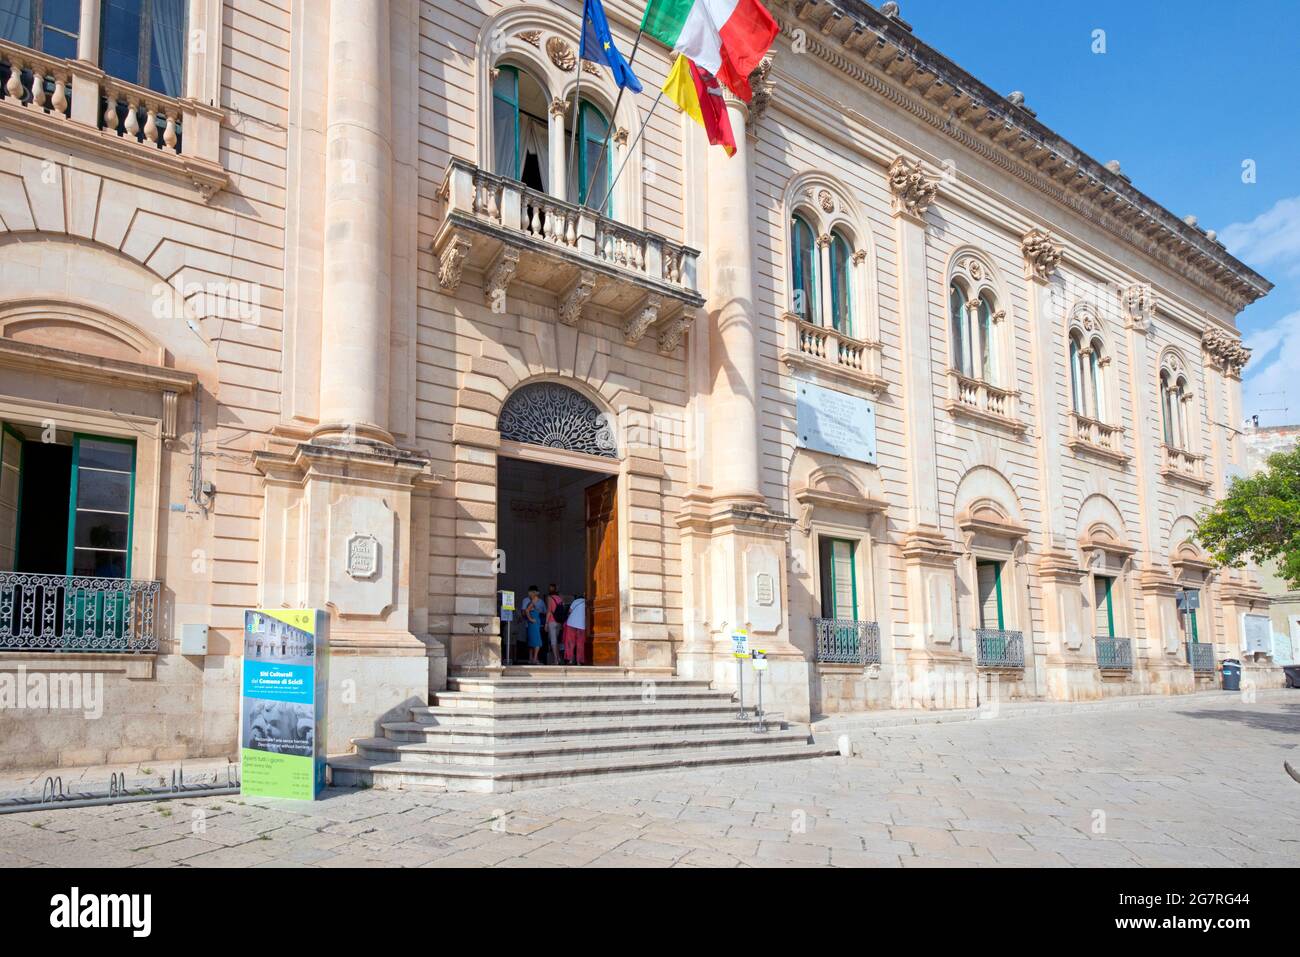 The town hall of the baroque city of Scicli. Ragusa, Sicily, Italy Stock Photo